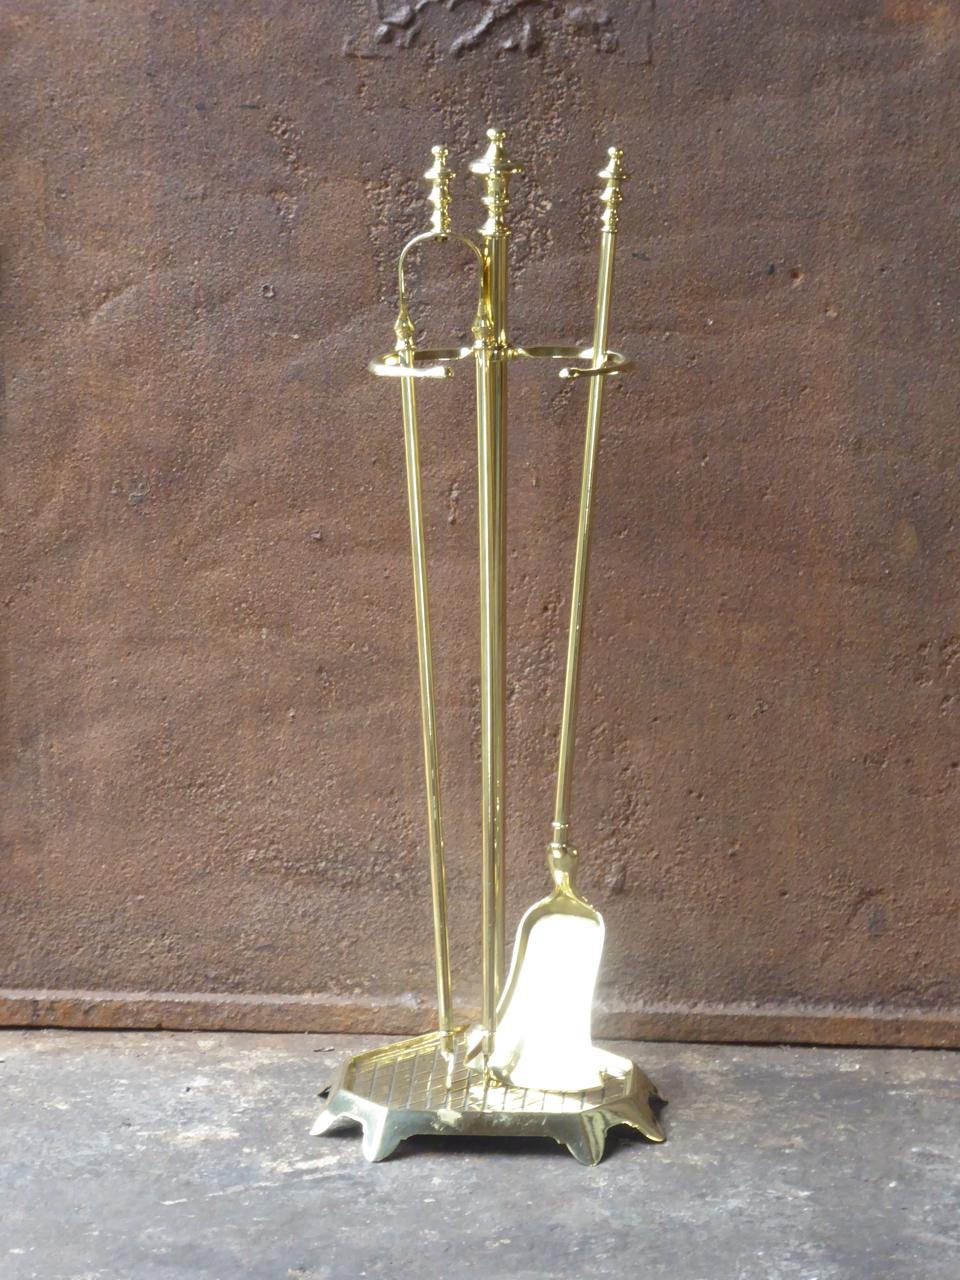 Early 20th century French Napoleon III fireplace tool set. The fire irons consist of a stand and two fireplace tools. They are made of polished brass. The fire tools are in a good condition and are fully functional.

We have a unique and specialized